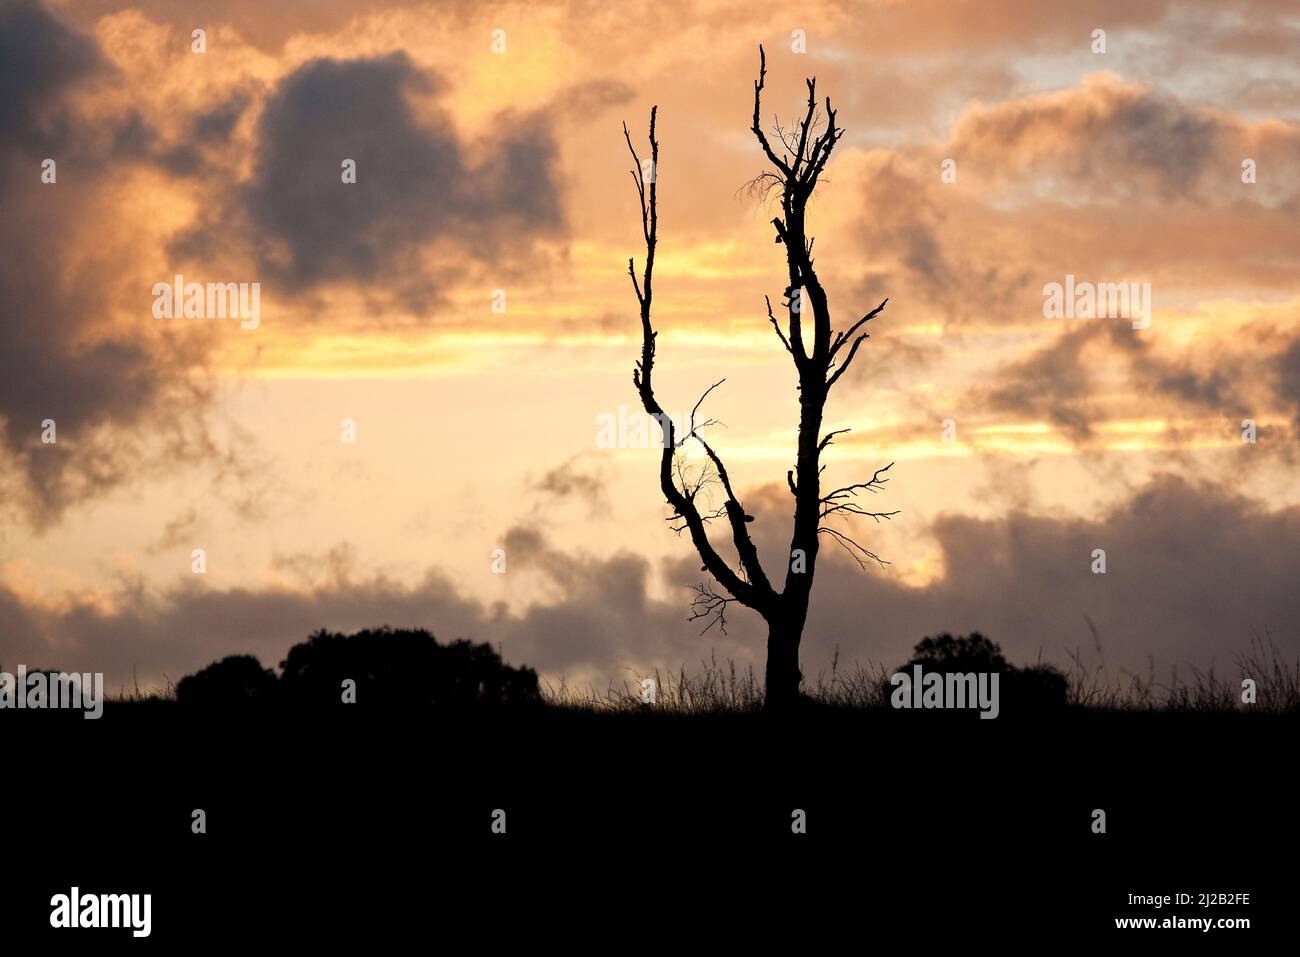 Sunset with silhouette of trees against a fiery evening sky with dramatic clouds Cannock Chase Country Park Staffordshire, England, Stock Photo